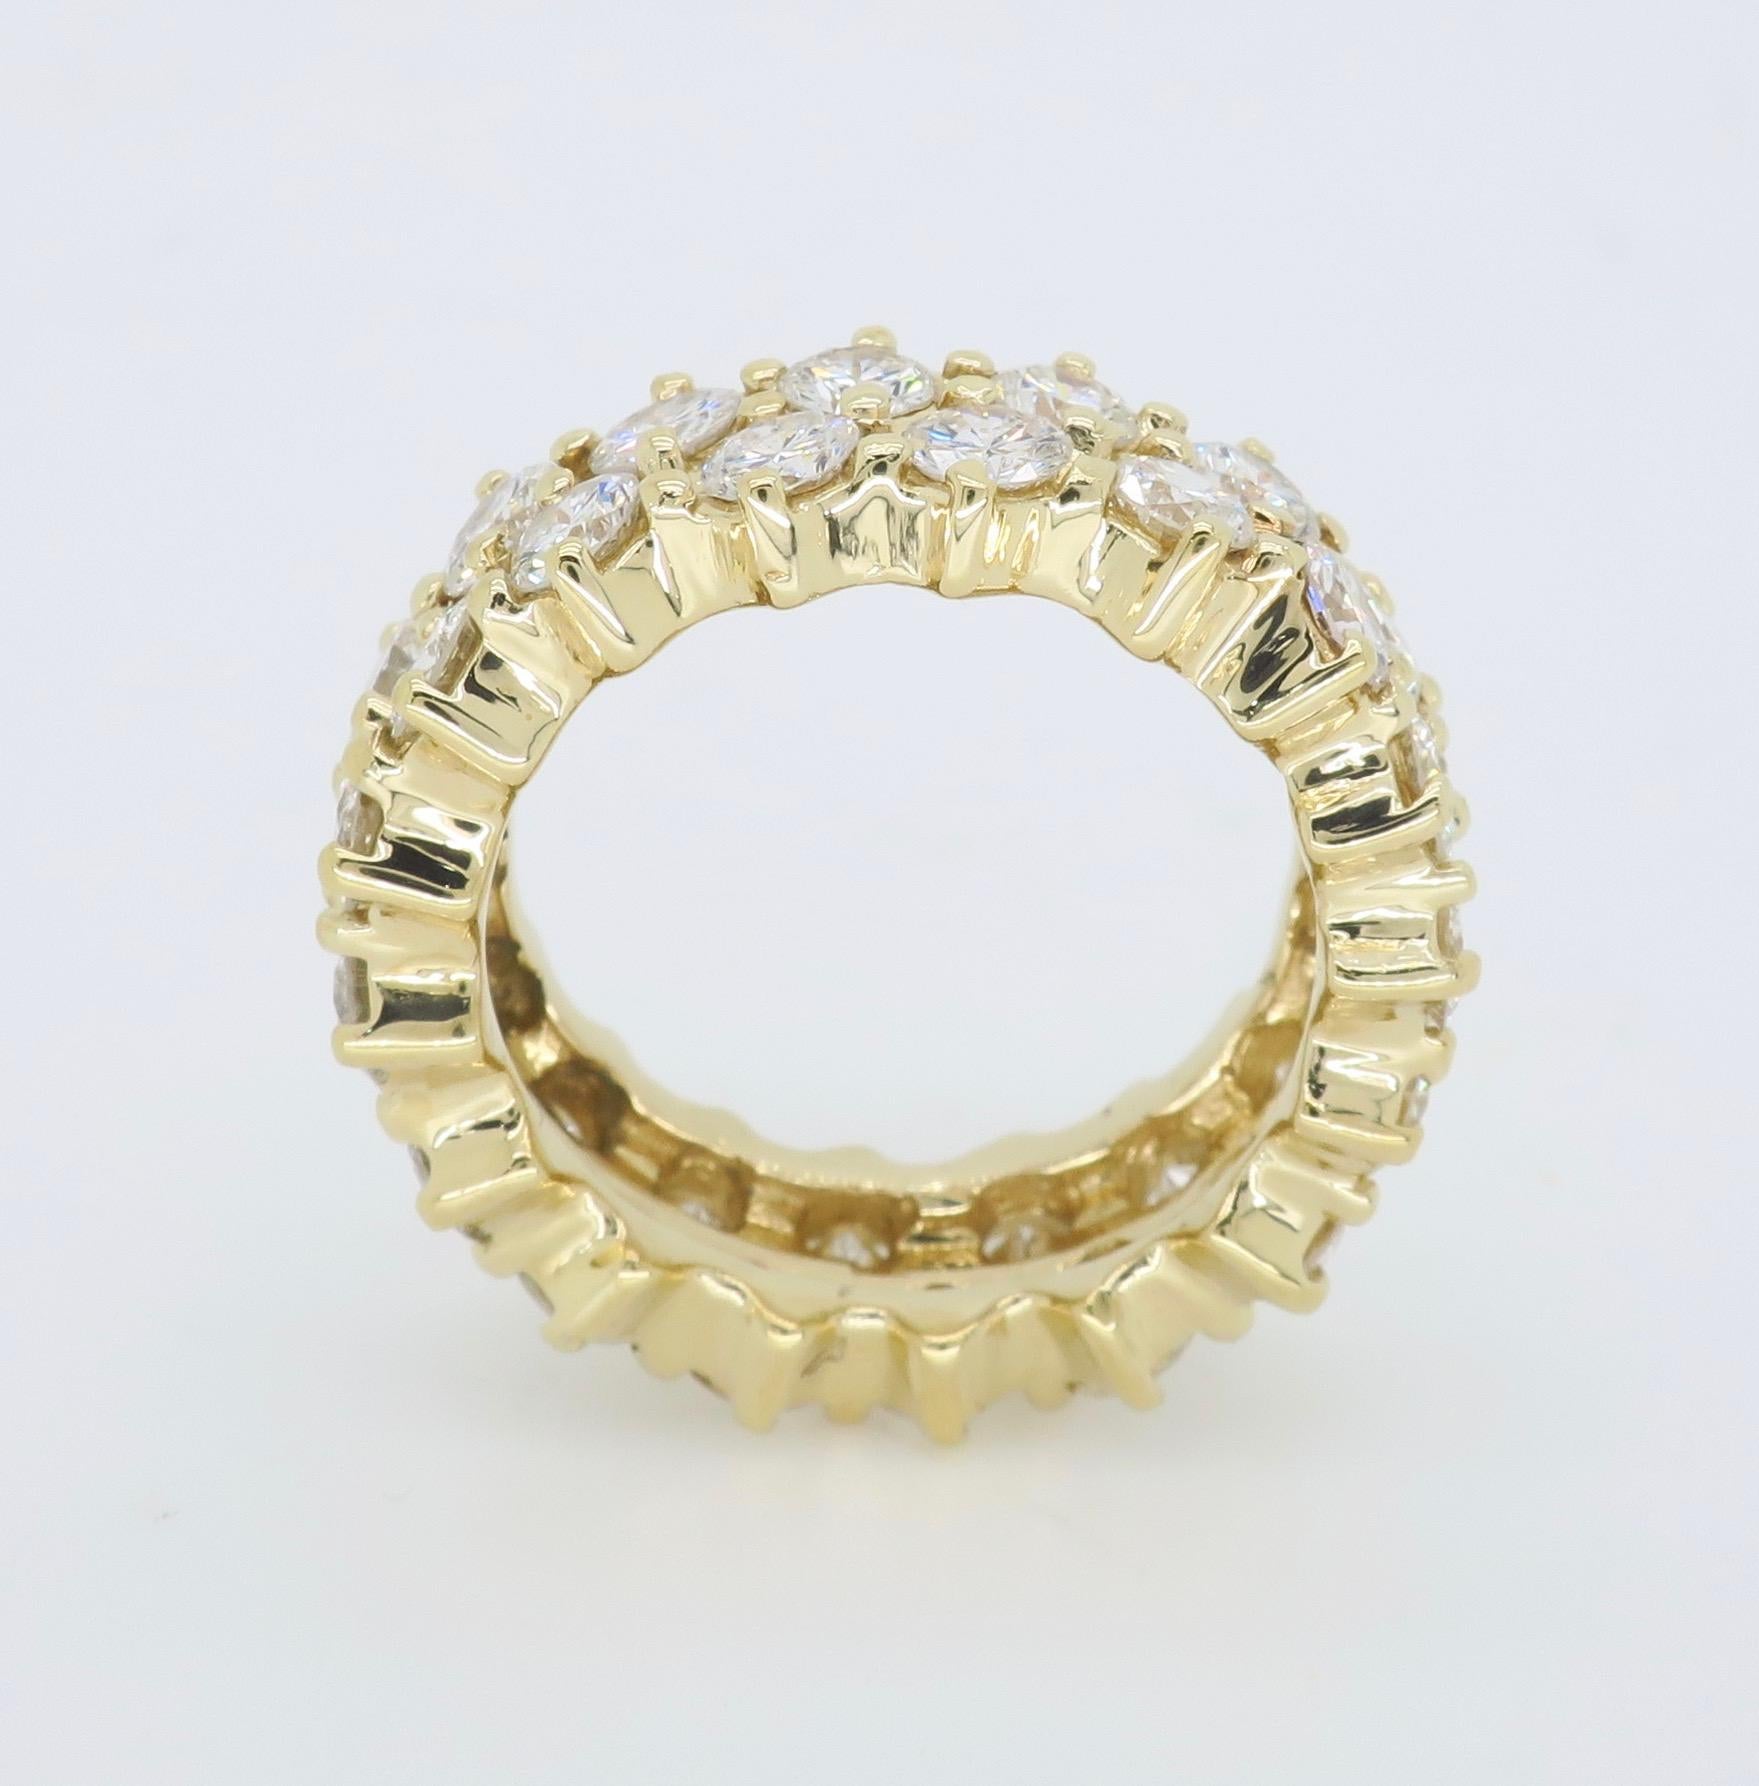 4.50 Carat Diamond Eternity Band Ring For Sale 1